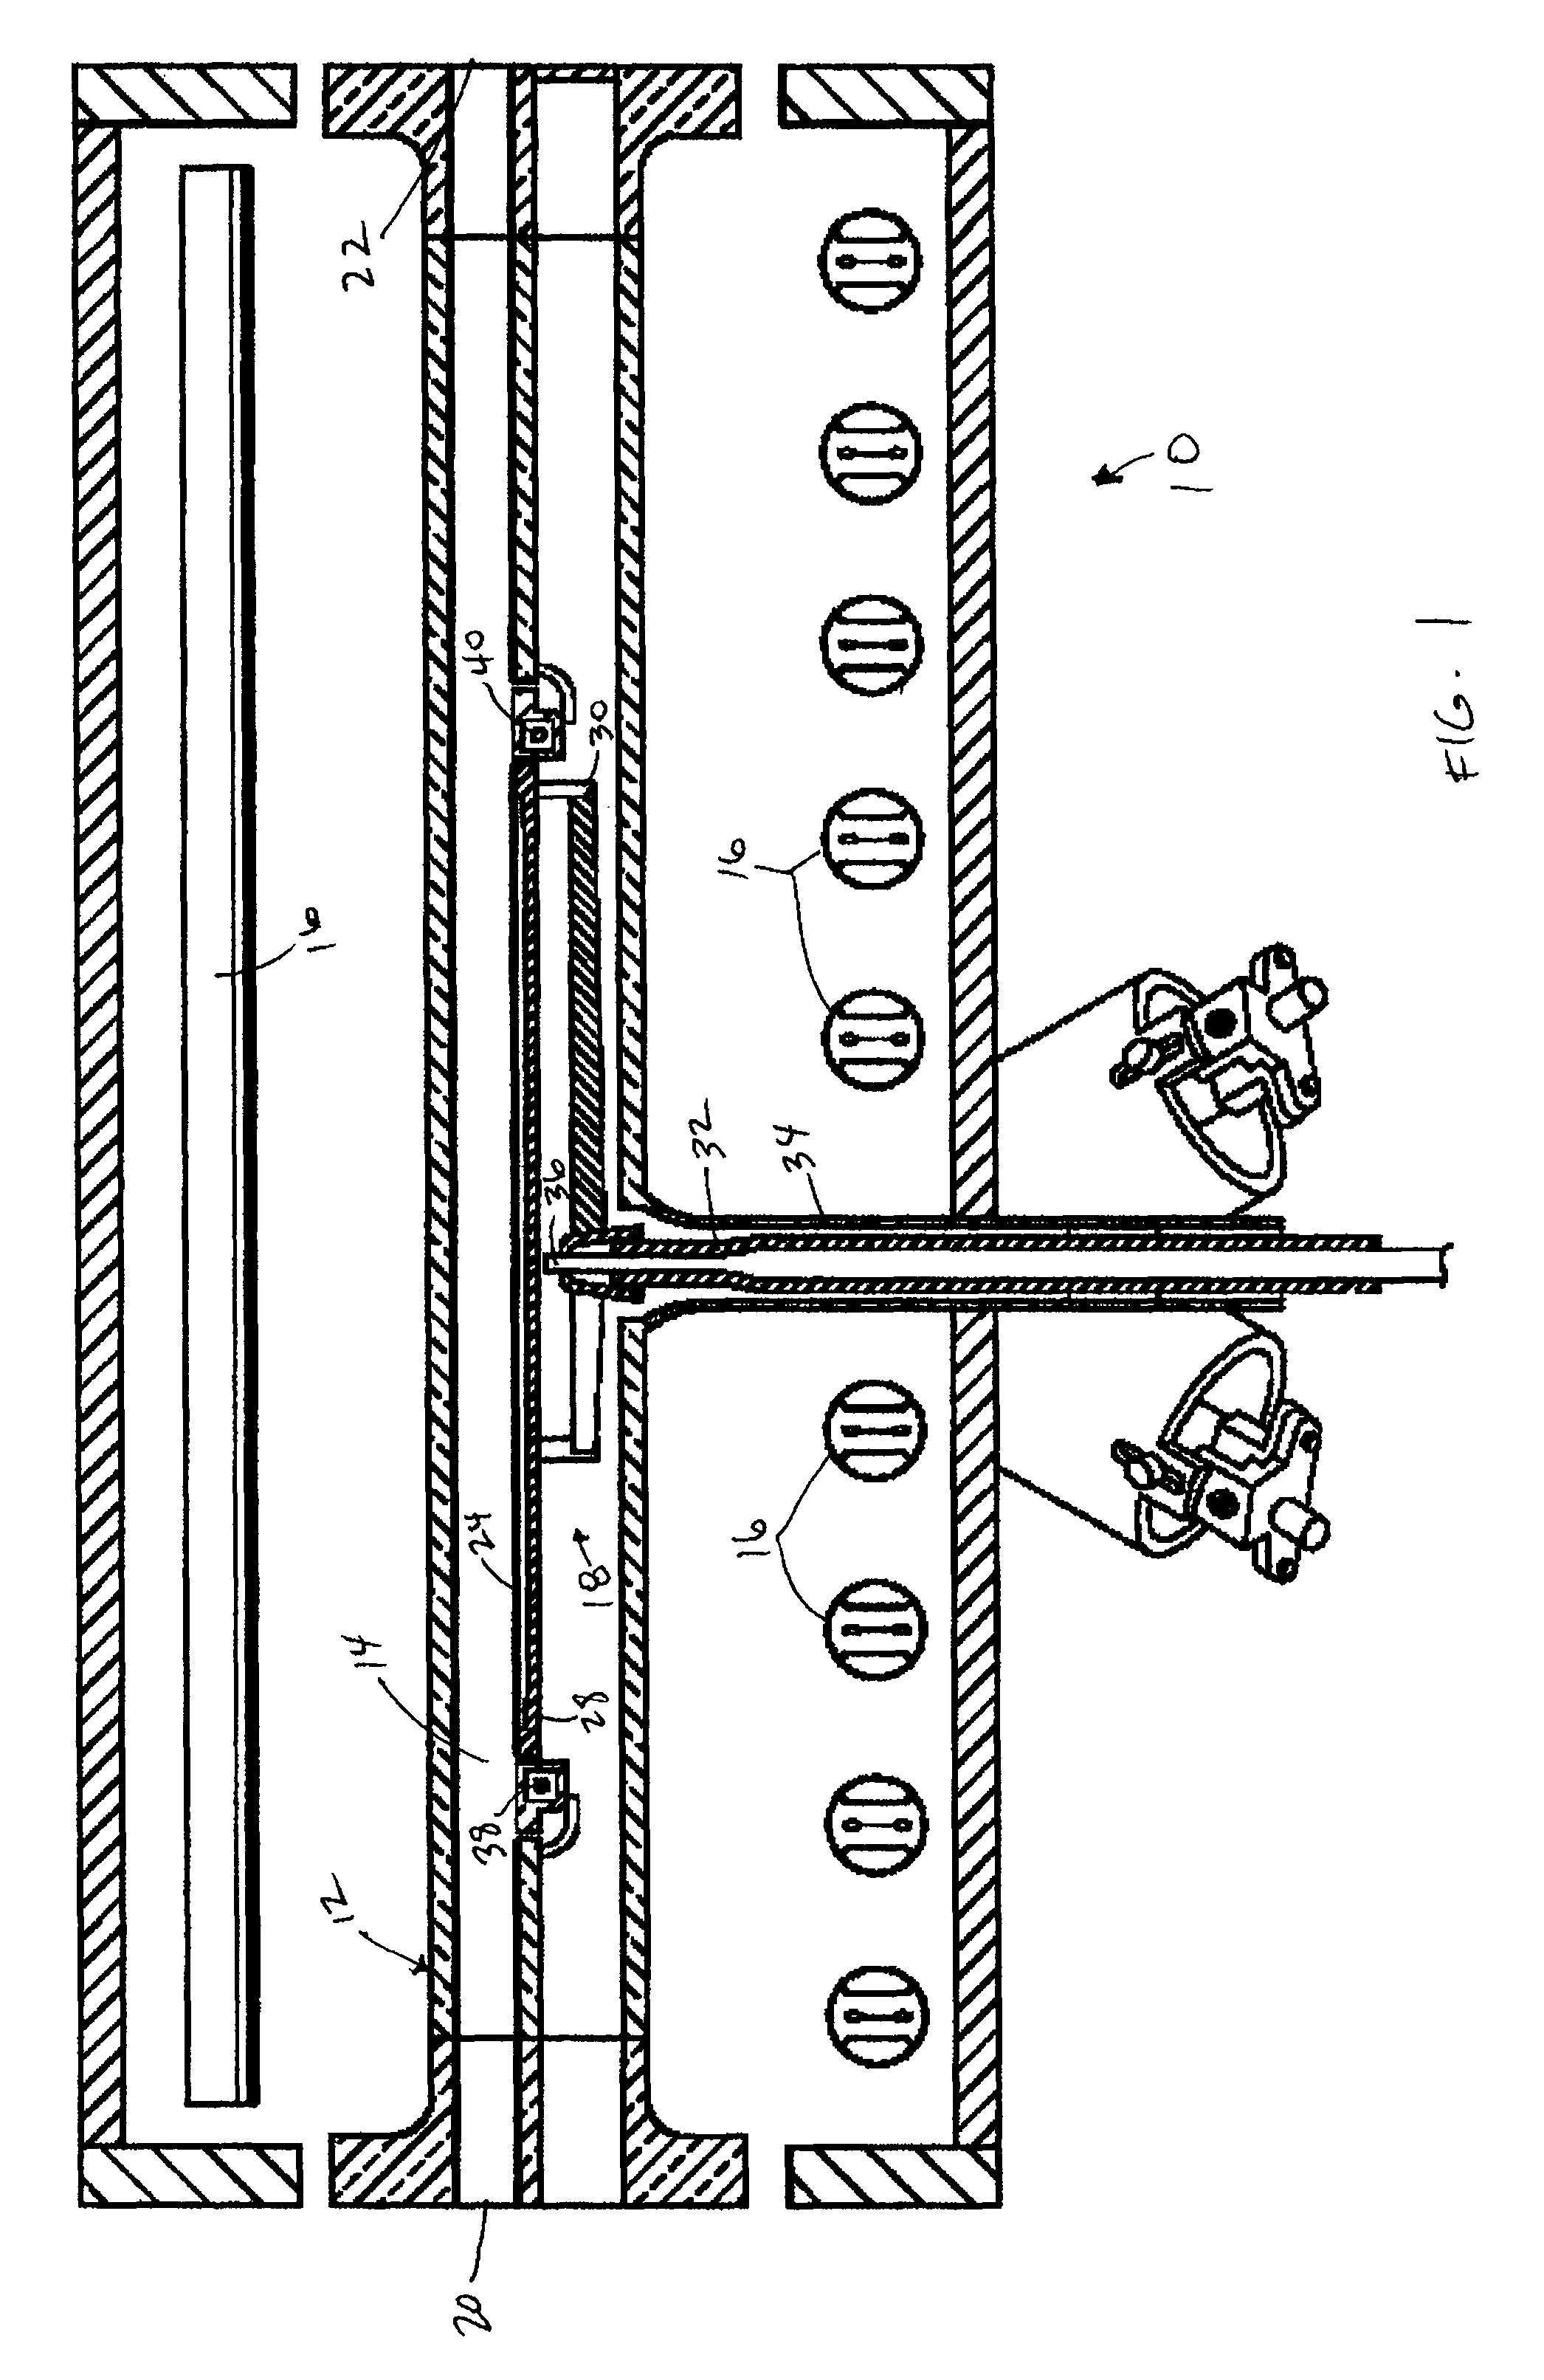 Thermocouple assembly with guarded thermocouple junction